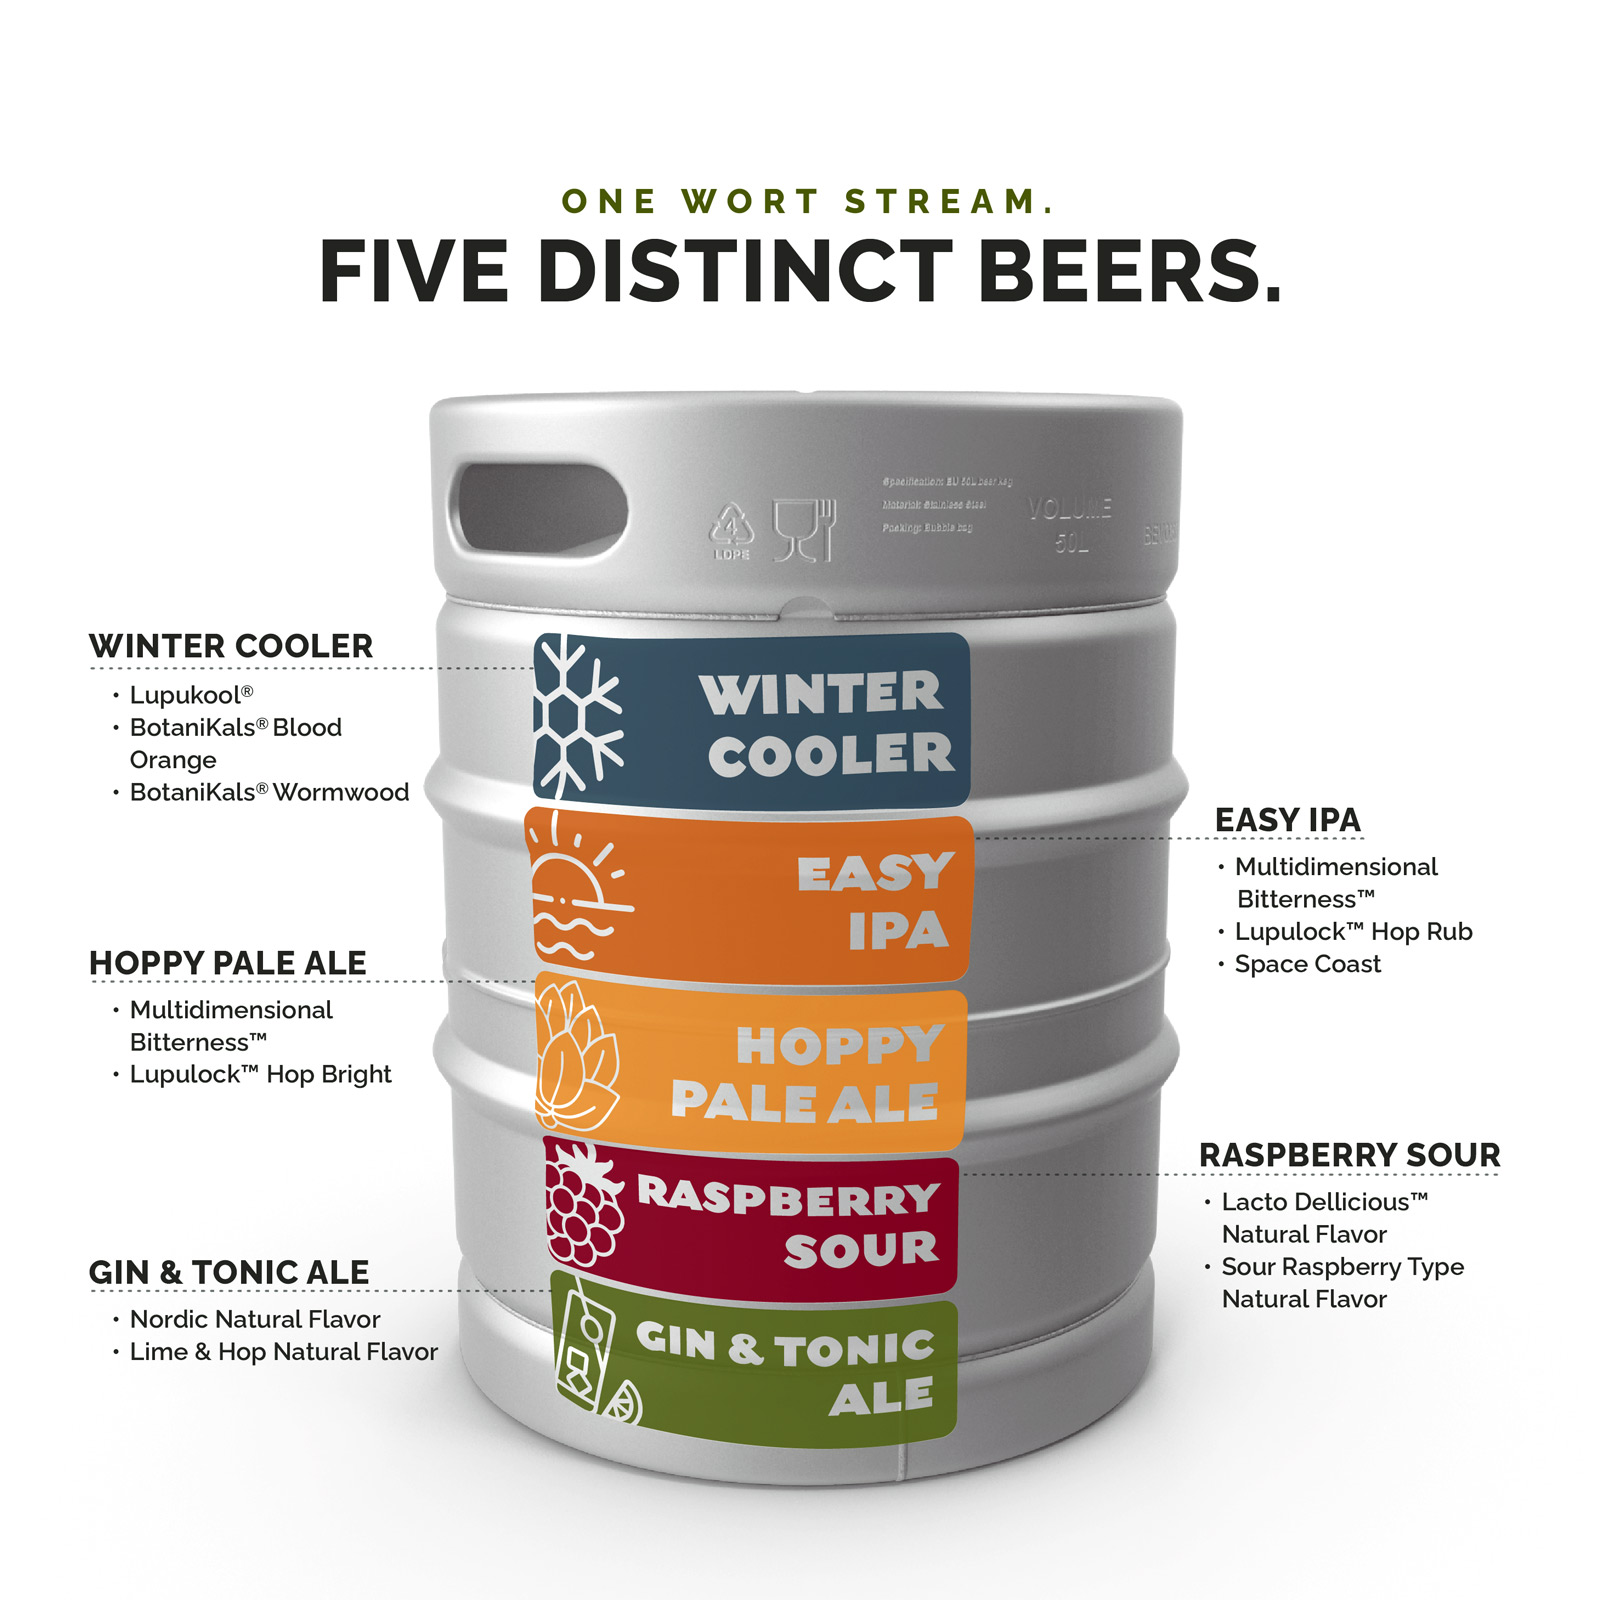 Graphic showing five beers from one wort stream